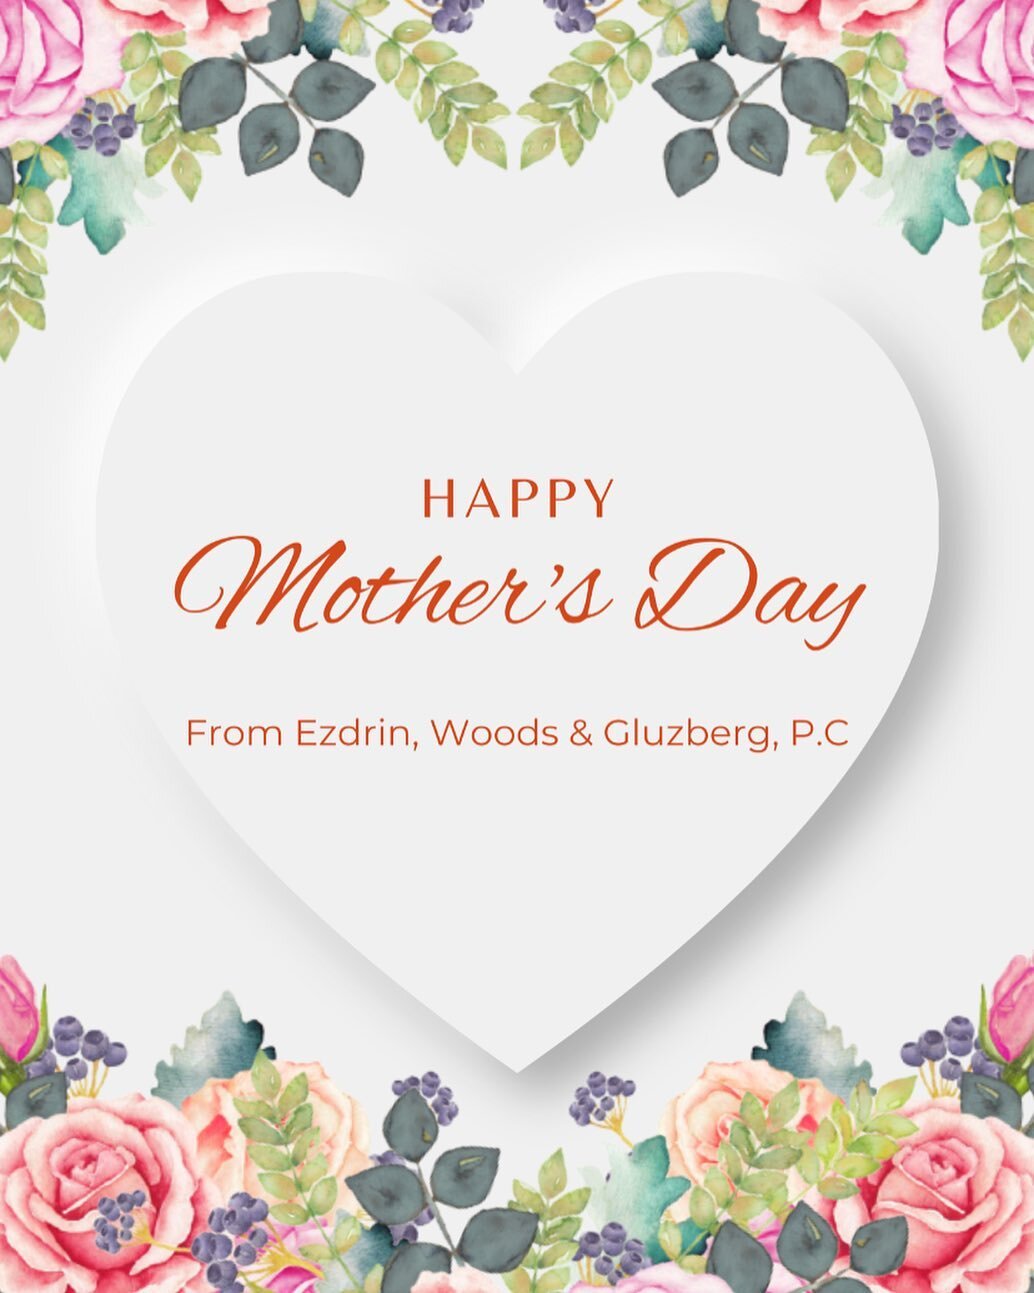 Sorry we&rsquo;re a day late but HAPPY MOTHER&rsquo;S DAY TO ALL THE WONDERFUL MOTHERS❤️
&bull;
&bull;
&bull;

#lawyersofinstagram #longislandattorneys #matrimonialattorney 
#criminaldefenseattorney #toplawfirms #bettercallcharo #realestateattorney #